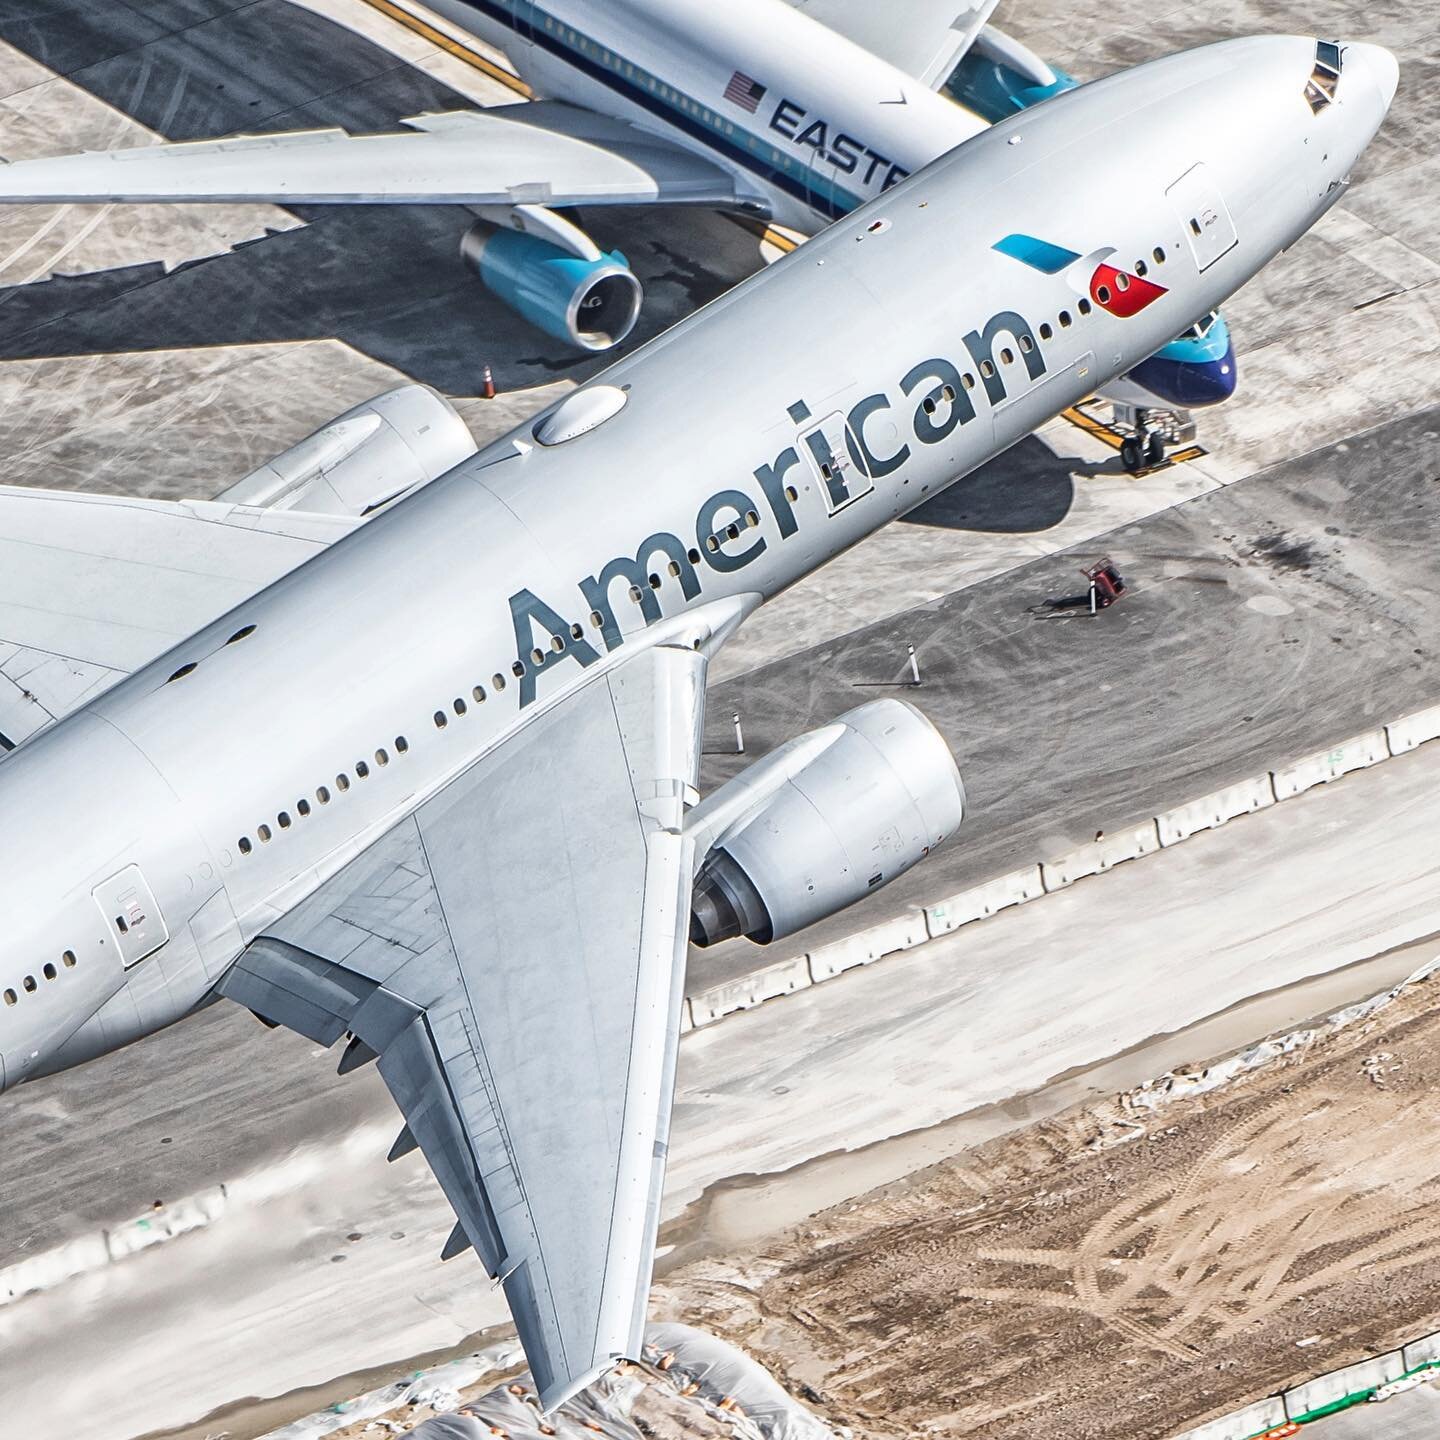 An American 777 rocketing out of Miami with an Eastern 767 in the background. #americanairlines #boeing777 #boeing #boeinglovers #miami #iflymia #miamiairport #a2a #aerialphotography #aviation #instagramaviation #avgeek #aviationphotography #nikon #d